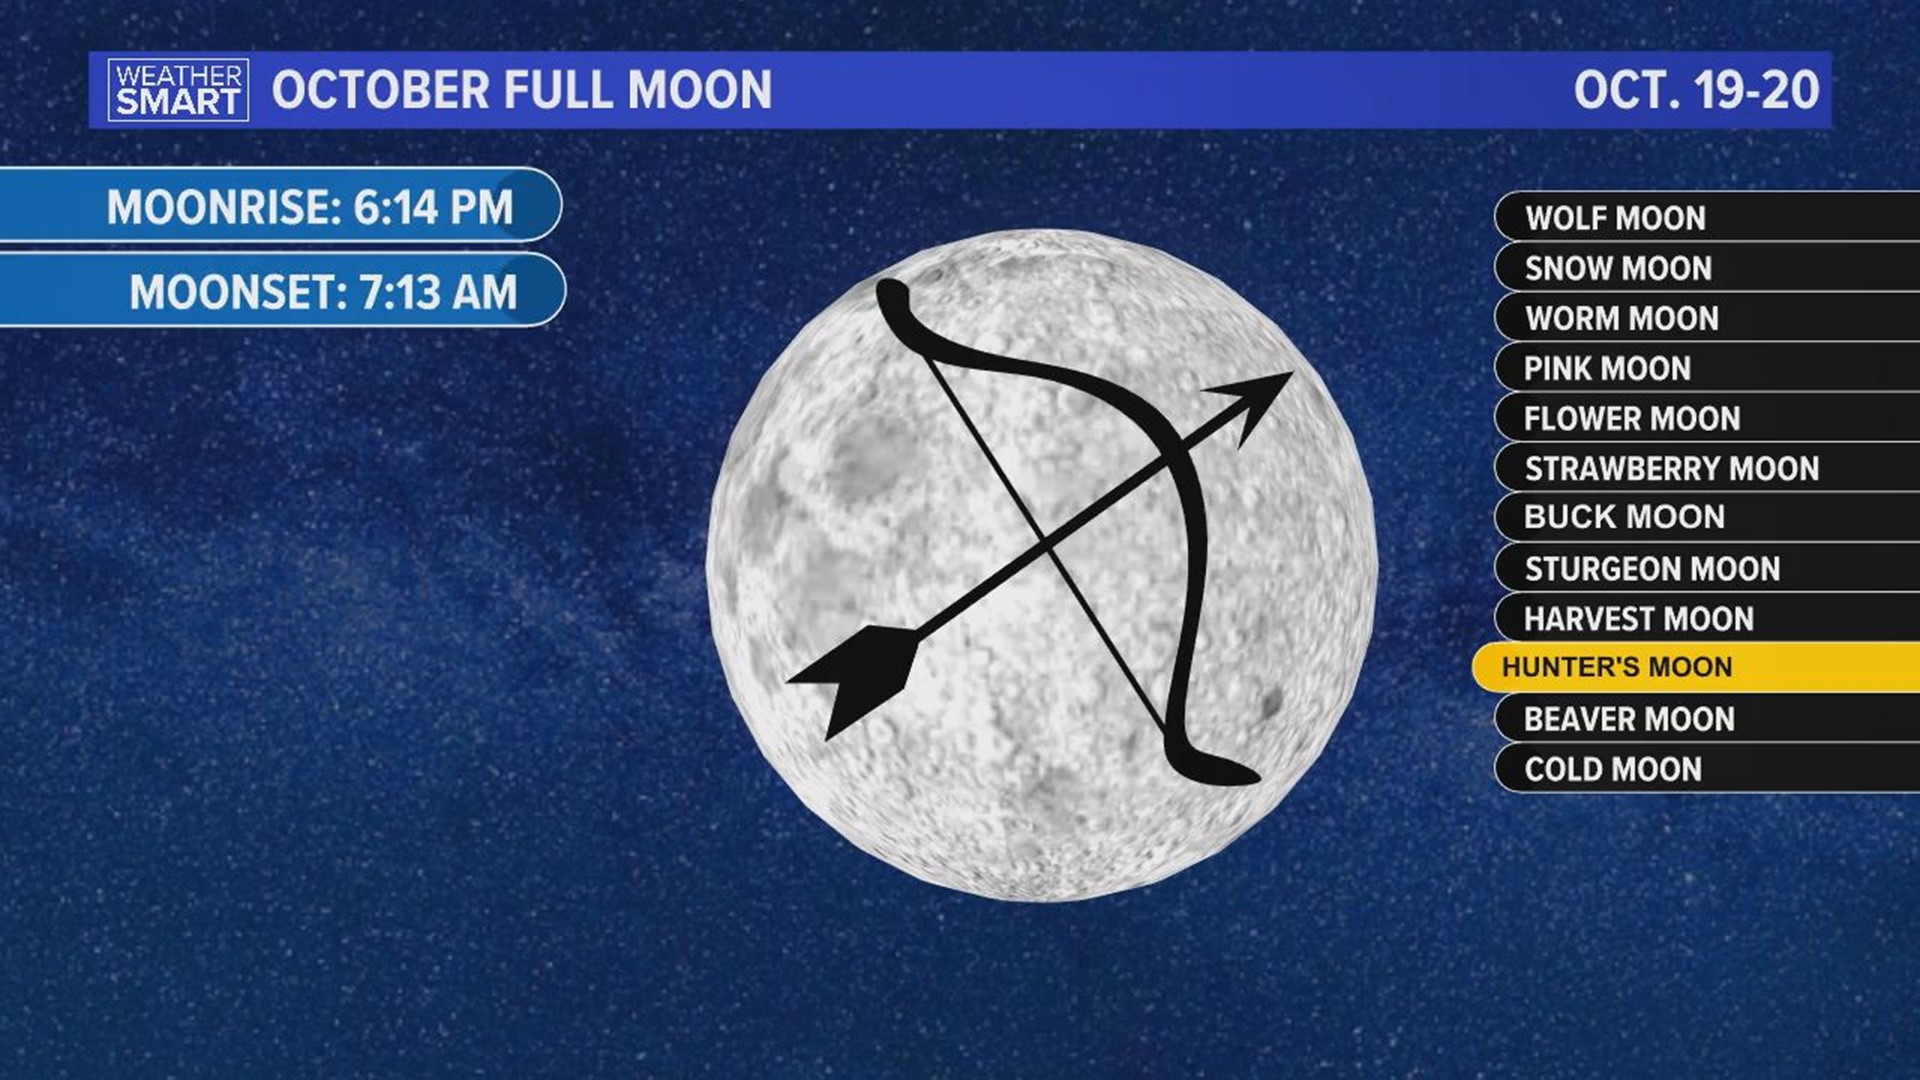 Two meteor showers and a full moon will be on display, though viewing conditions might not be perfect for every event.